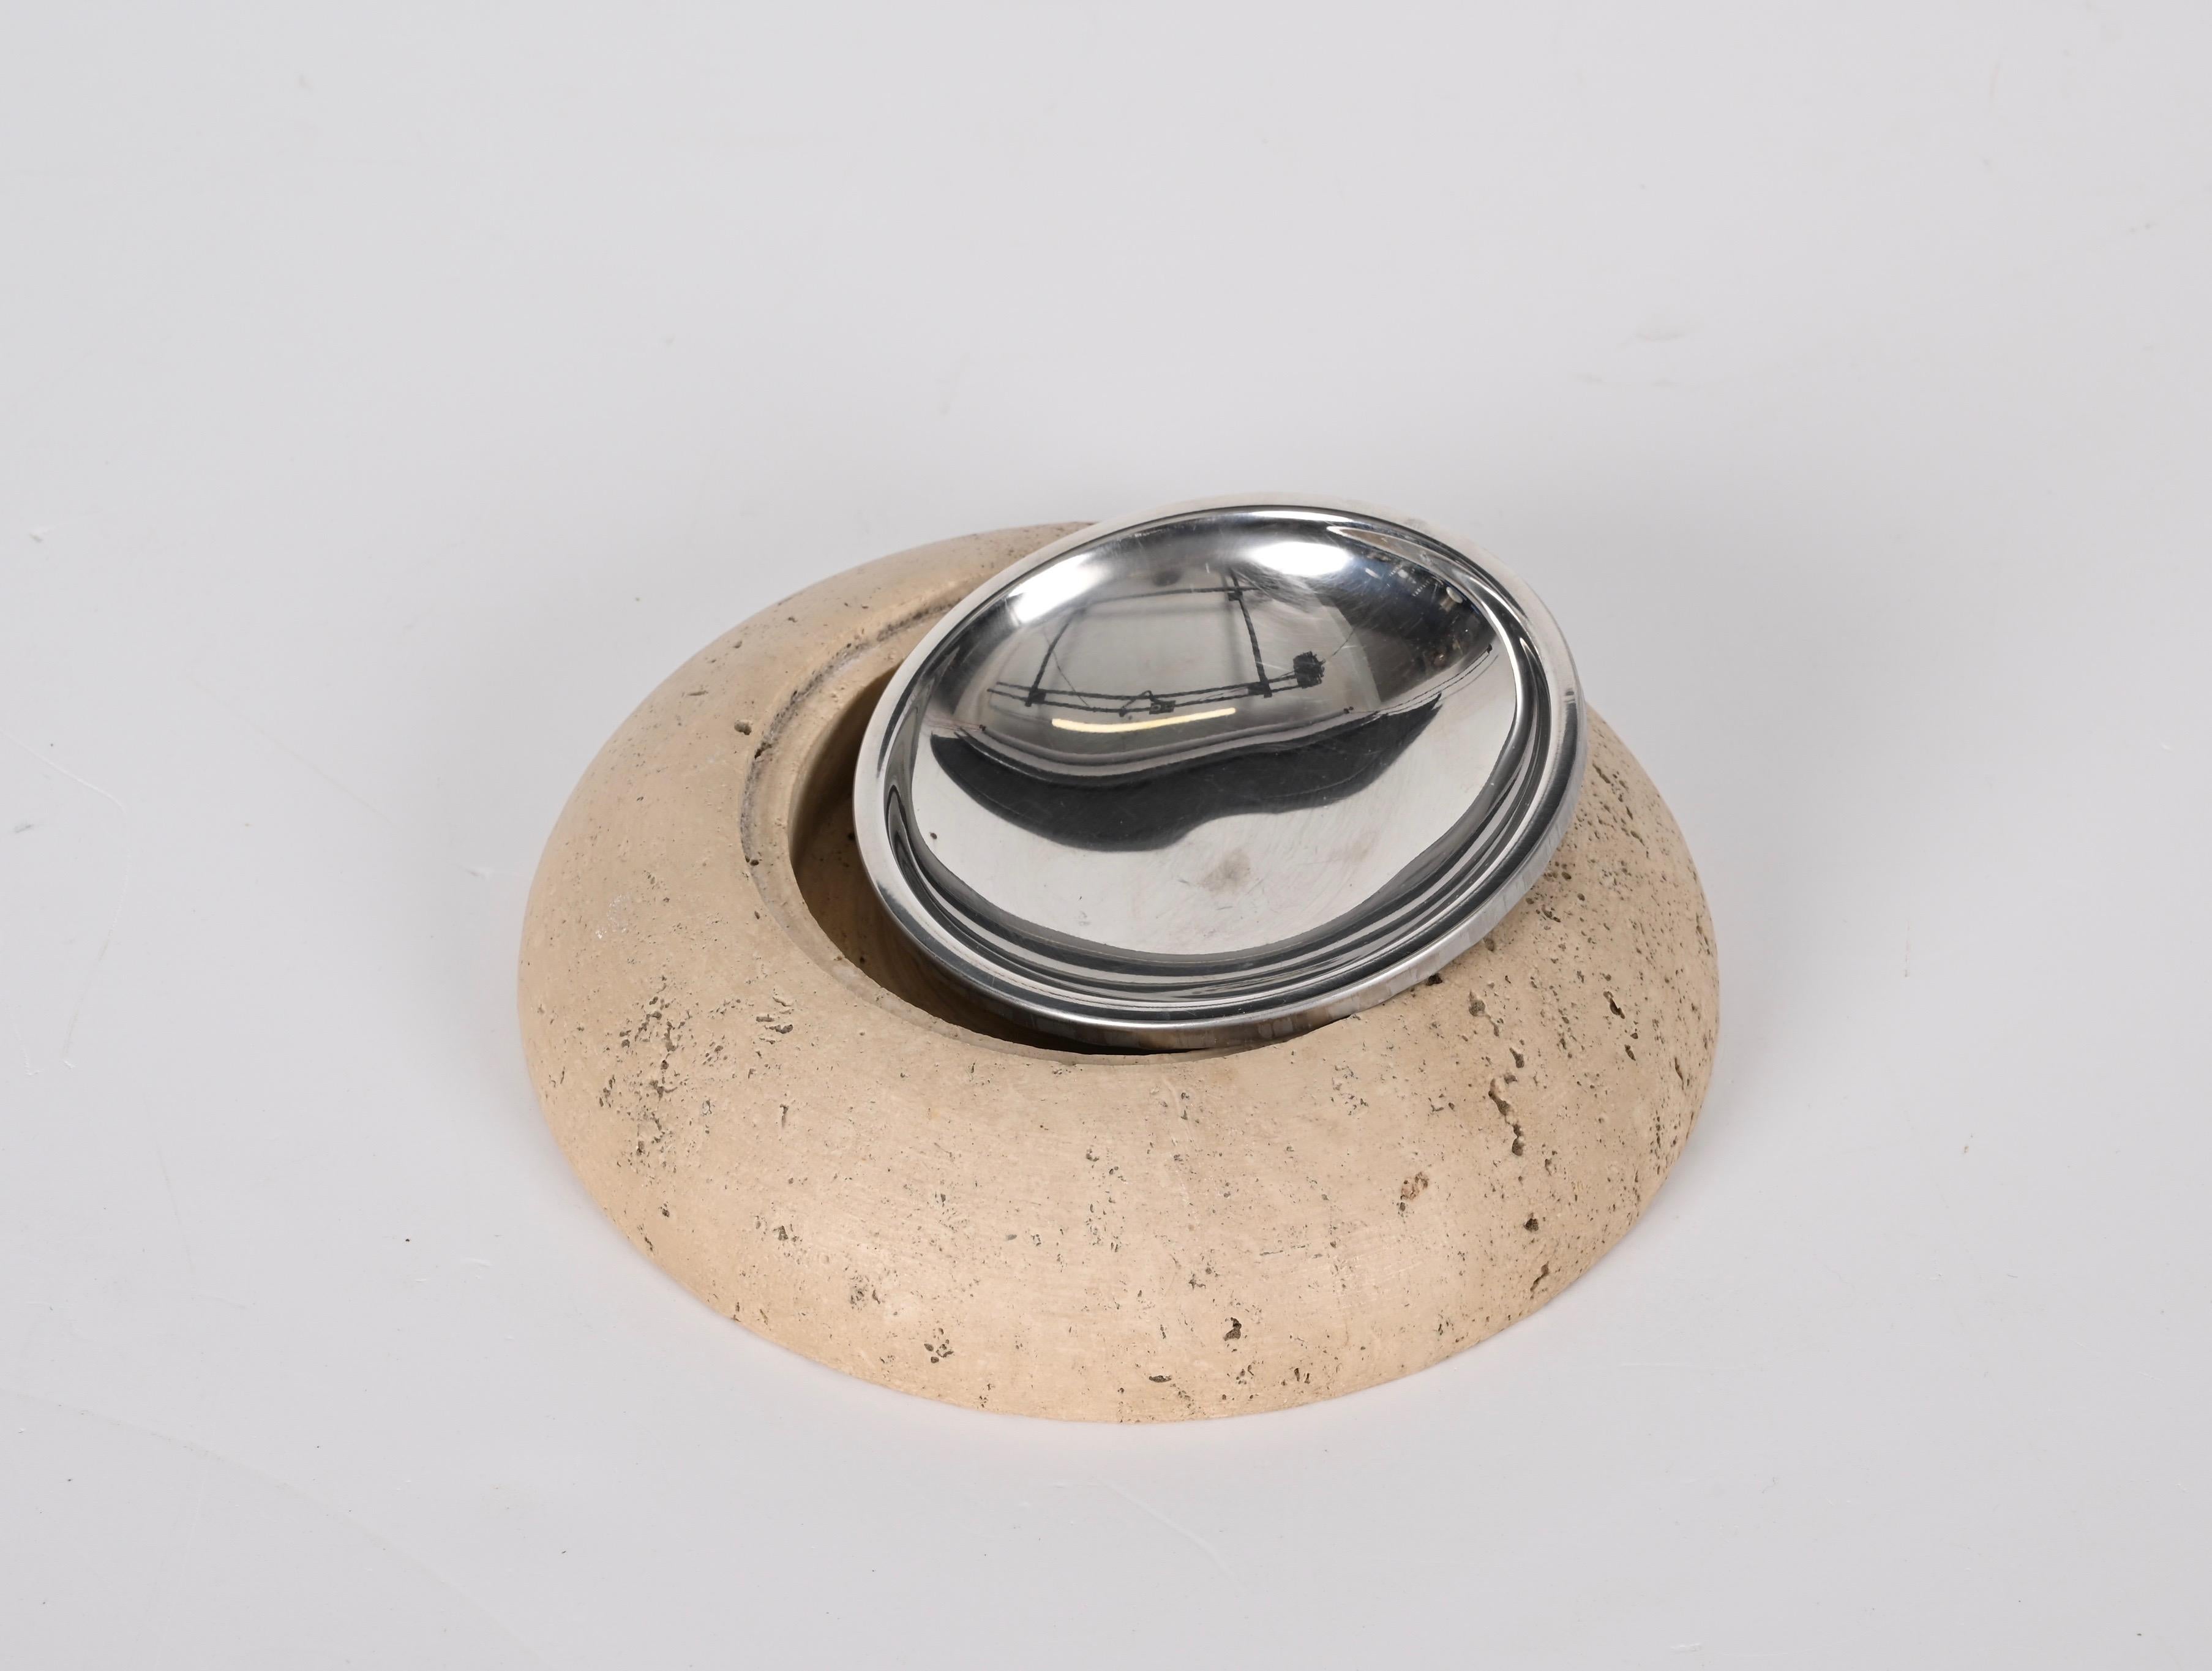 Midcentury Round Ashtray White Travertine Marble and Steel, Mannelli Italy 1970s For Sale 3